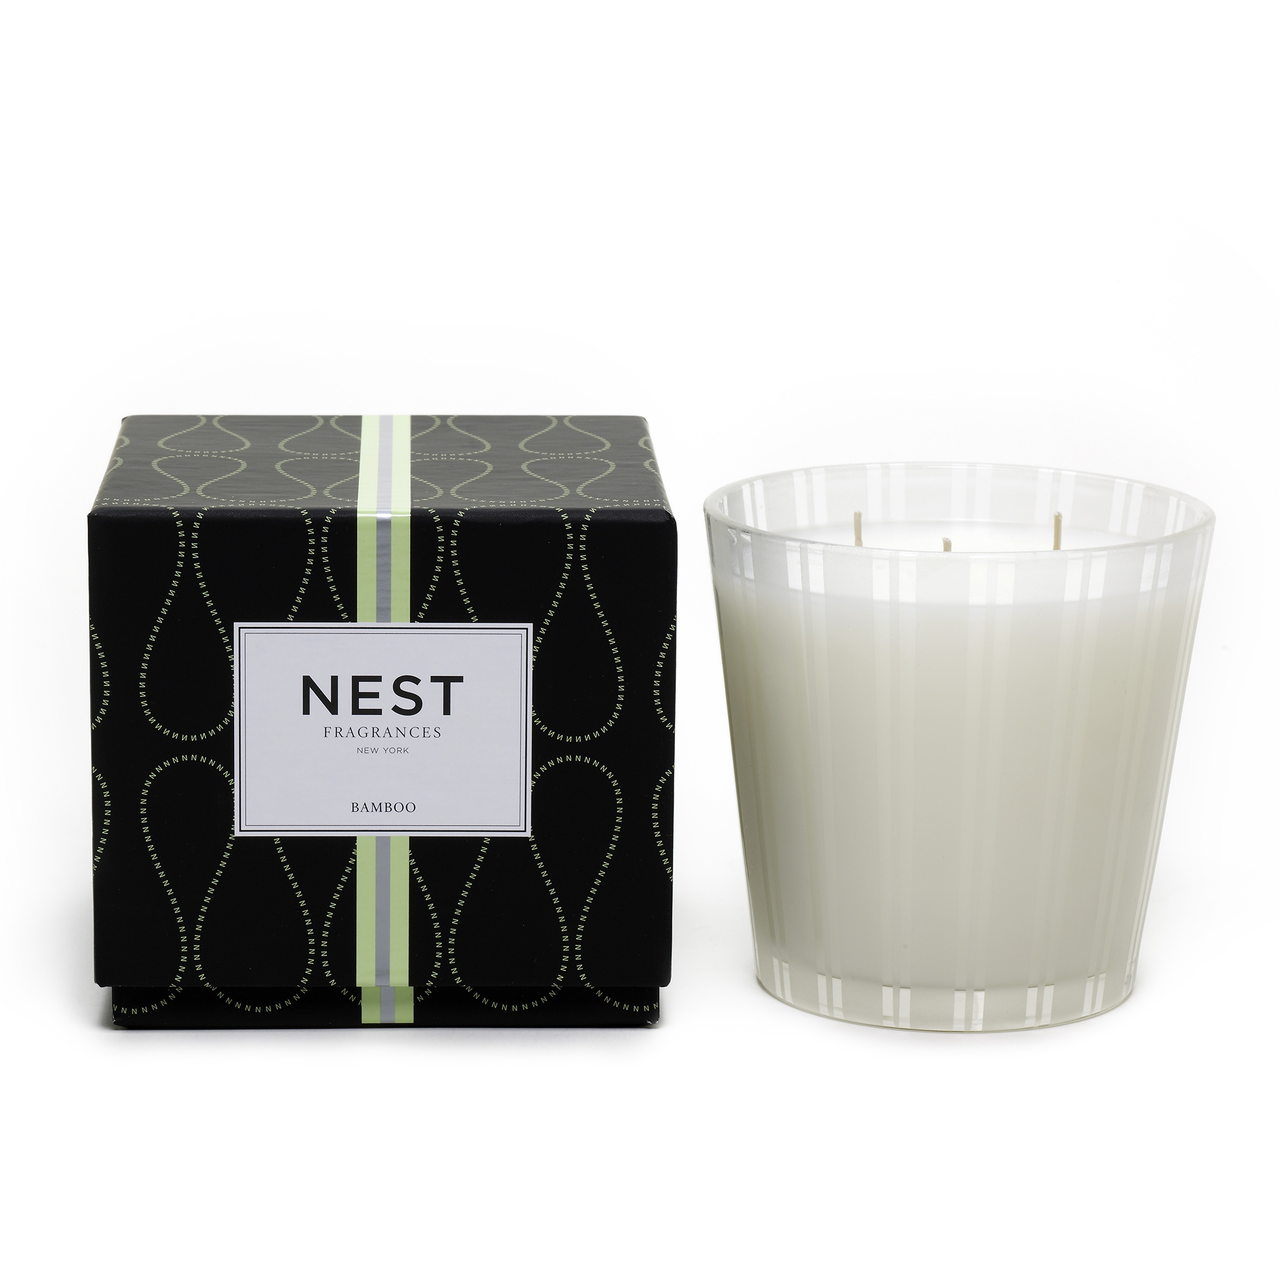 Nest Fragrances Bamboo 3-Wick Candle